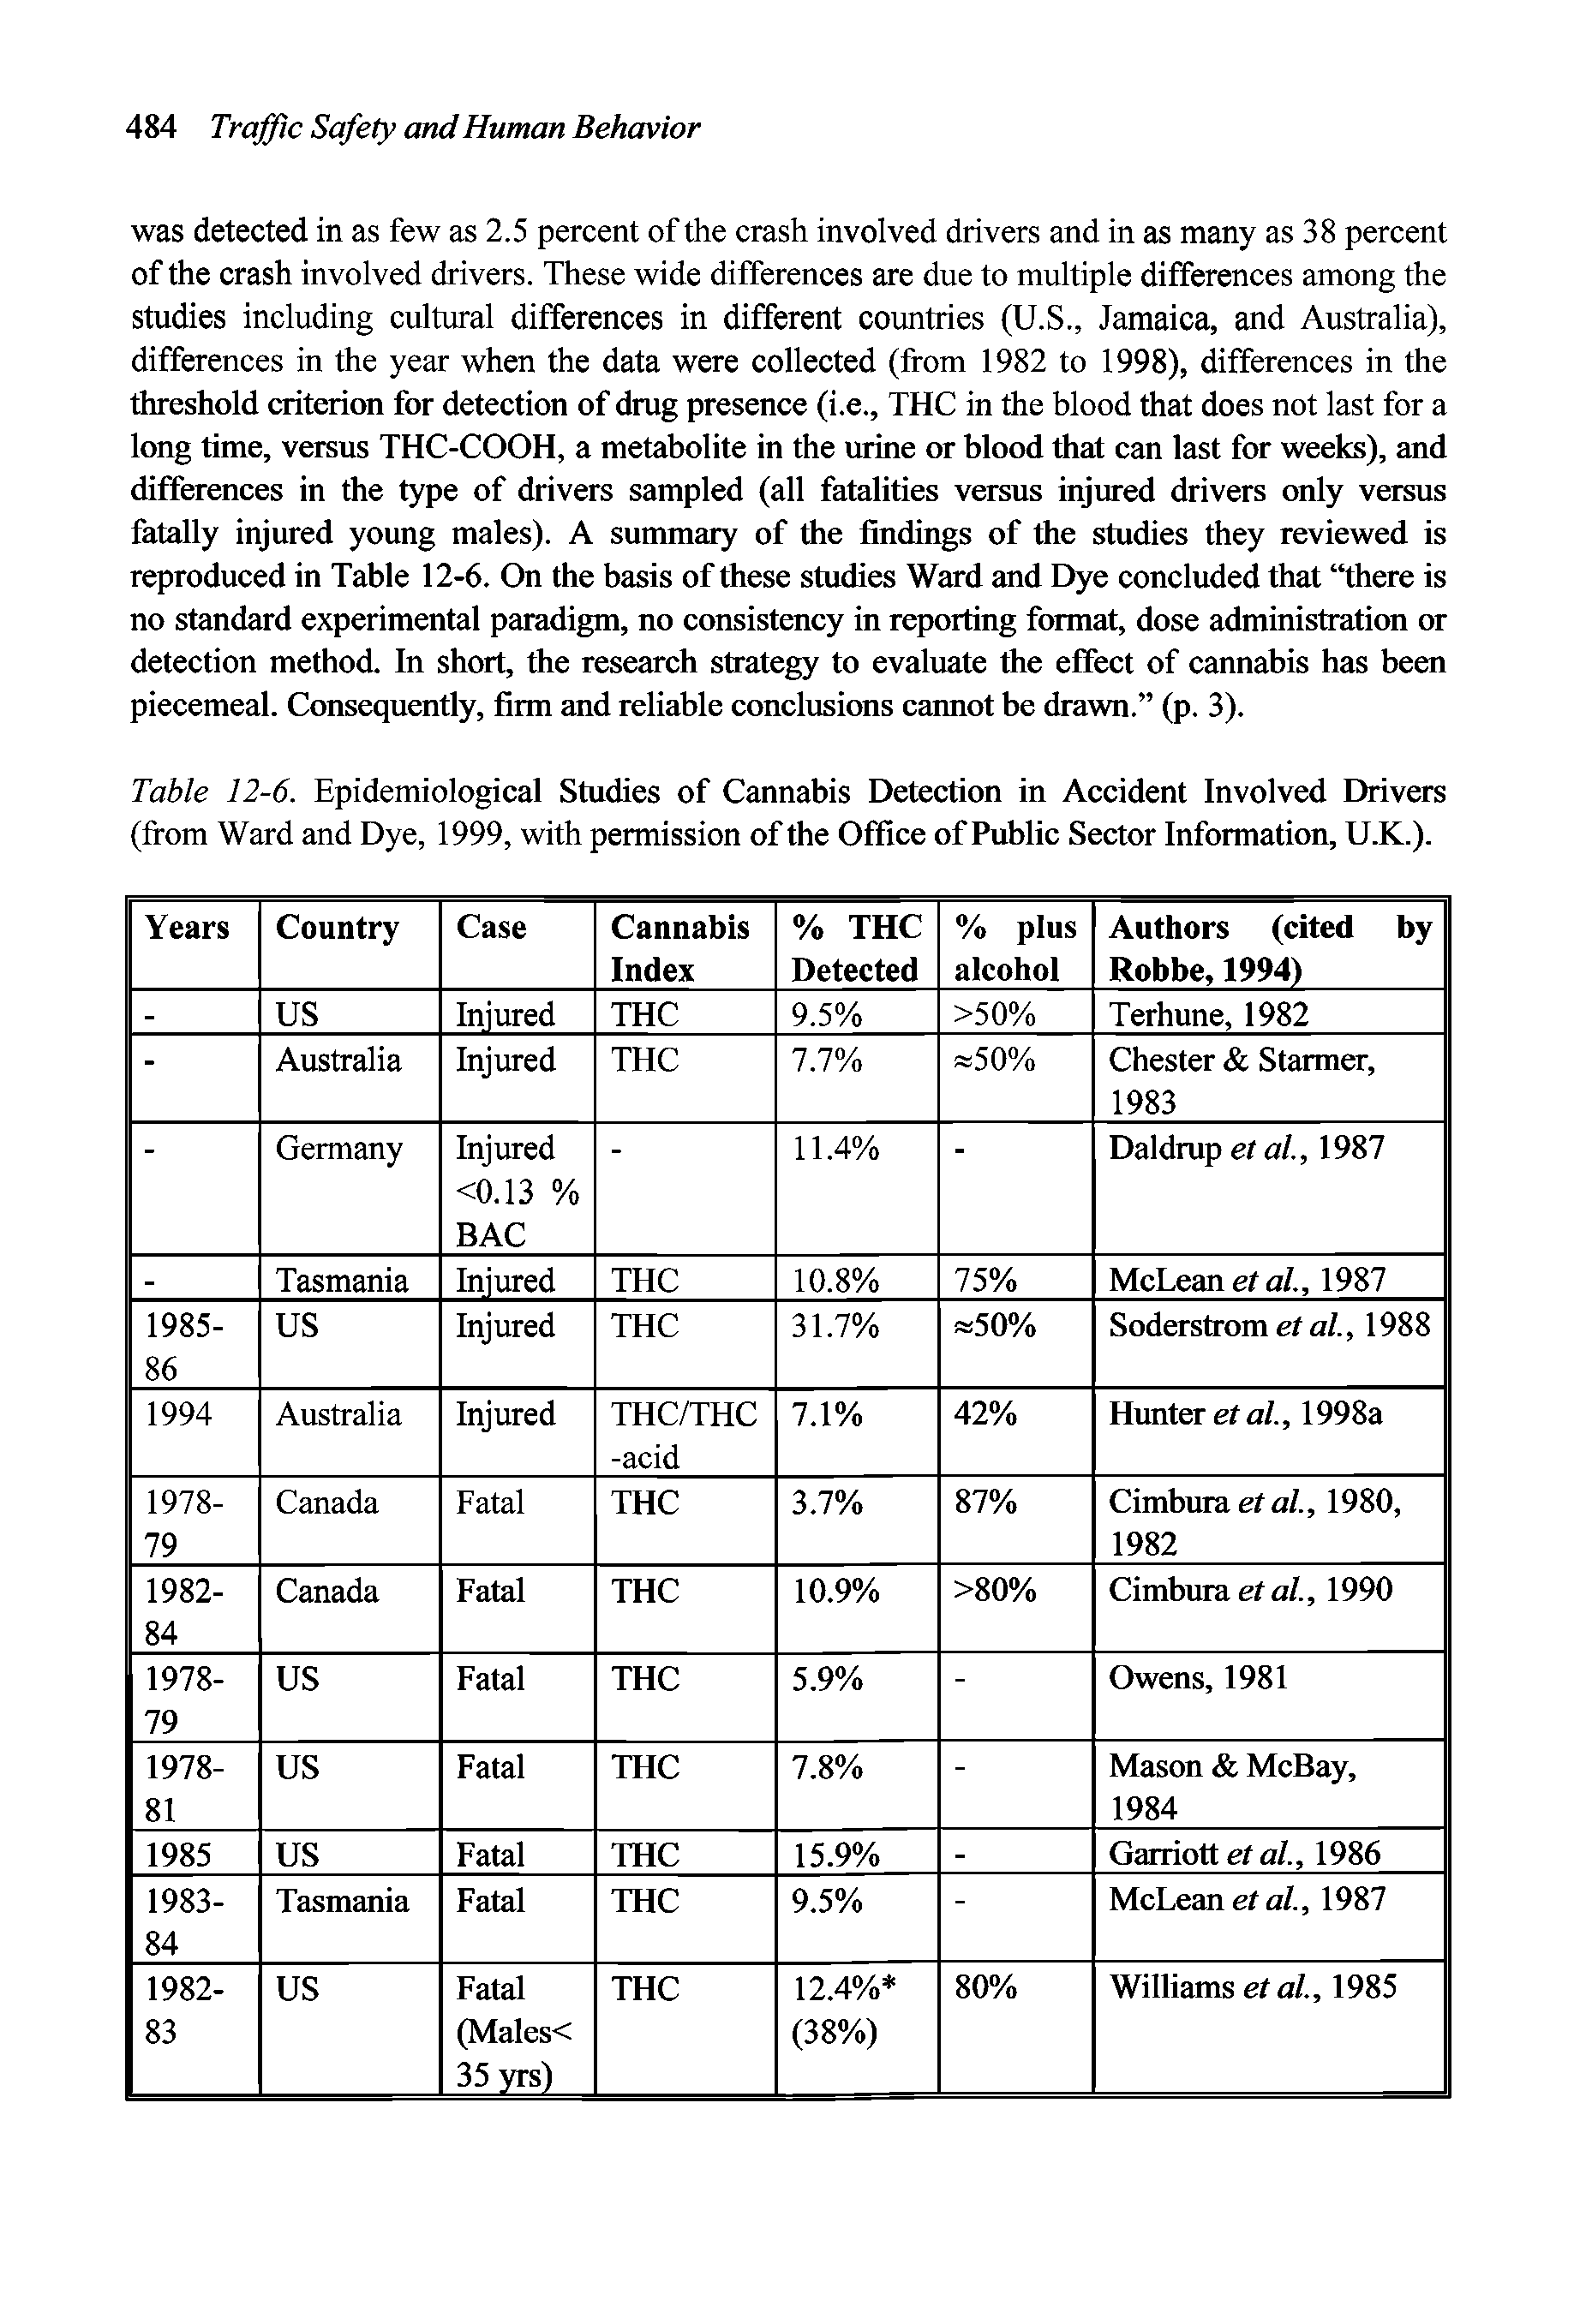 Table 12-6. Epidemiological Studies of Cannabis Detection in Accident Involved Drivers (from Ward and Dye, 1999, with permission of the Office of Public Sector Information, UX.).